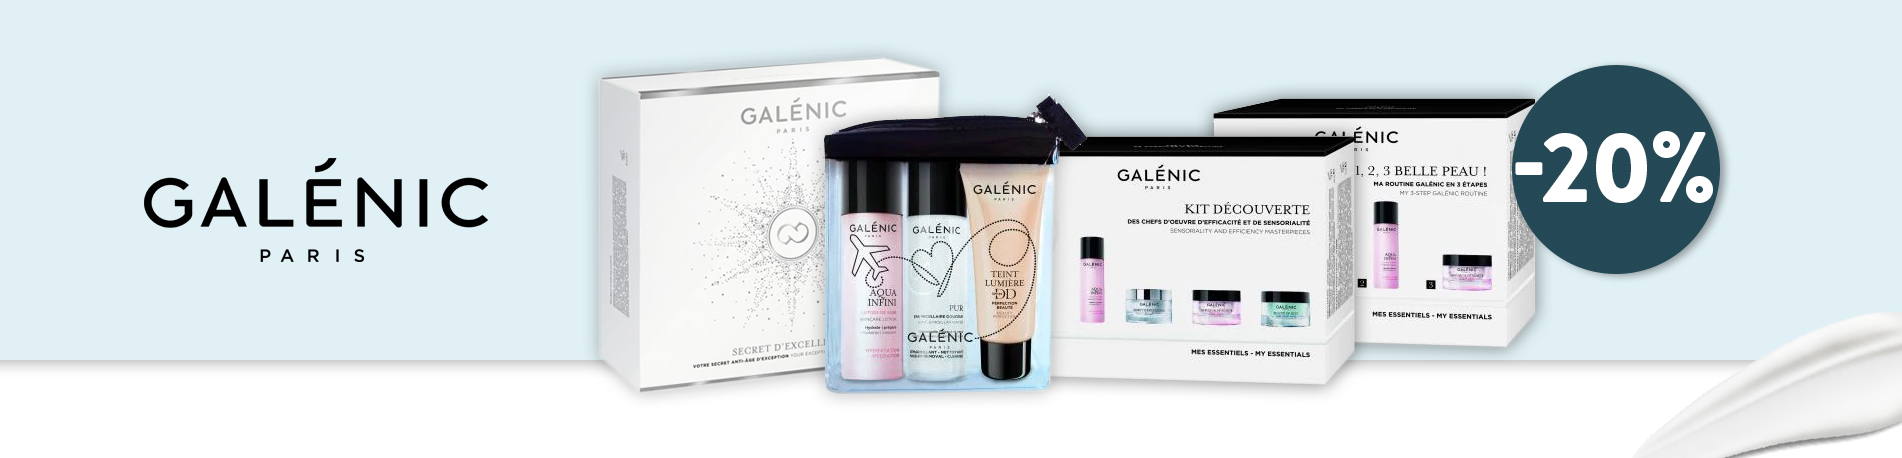 Promotion-Galenic